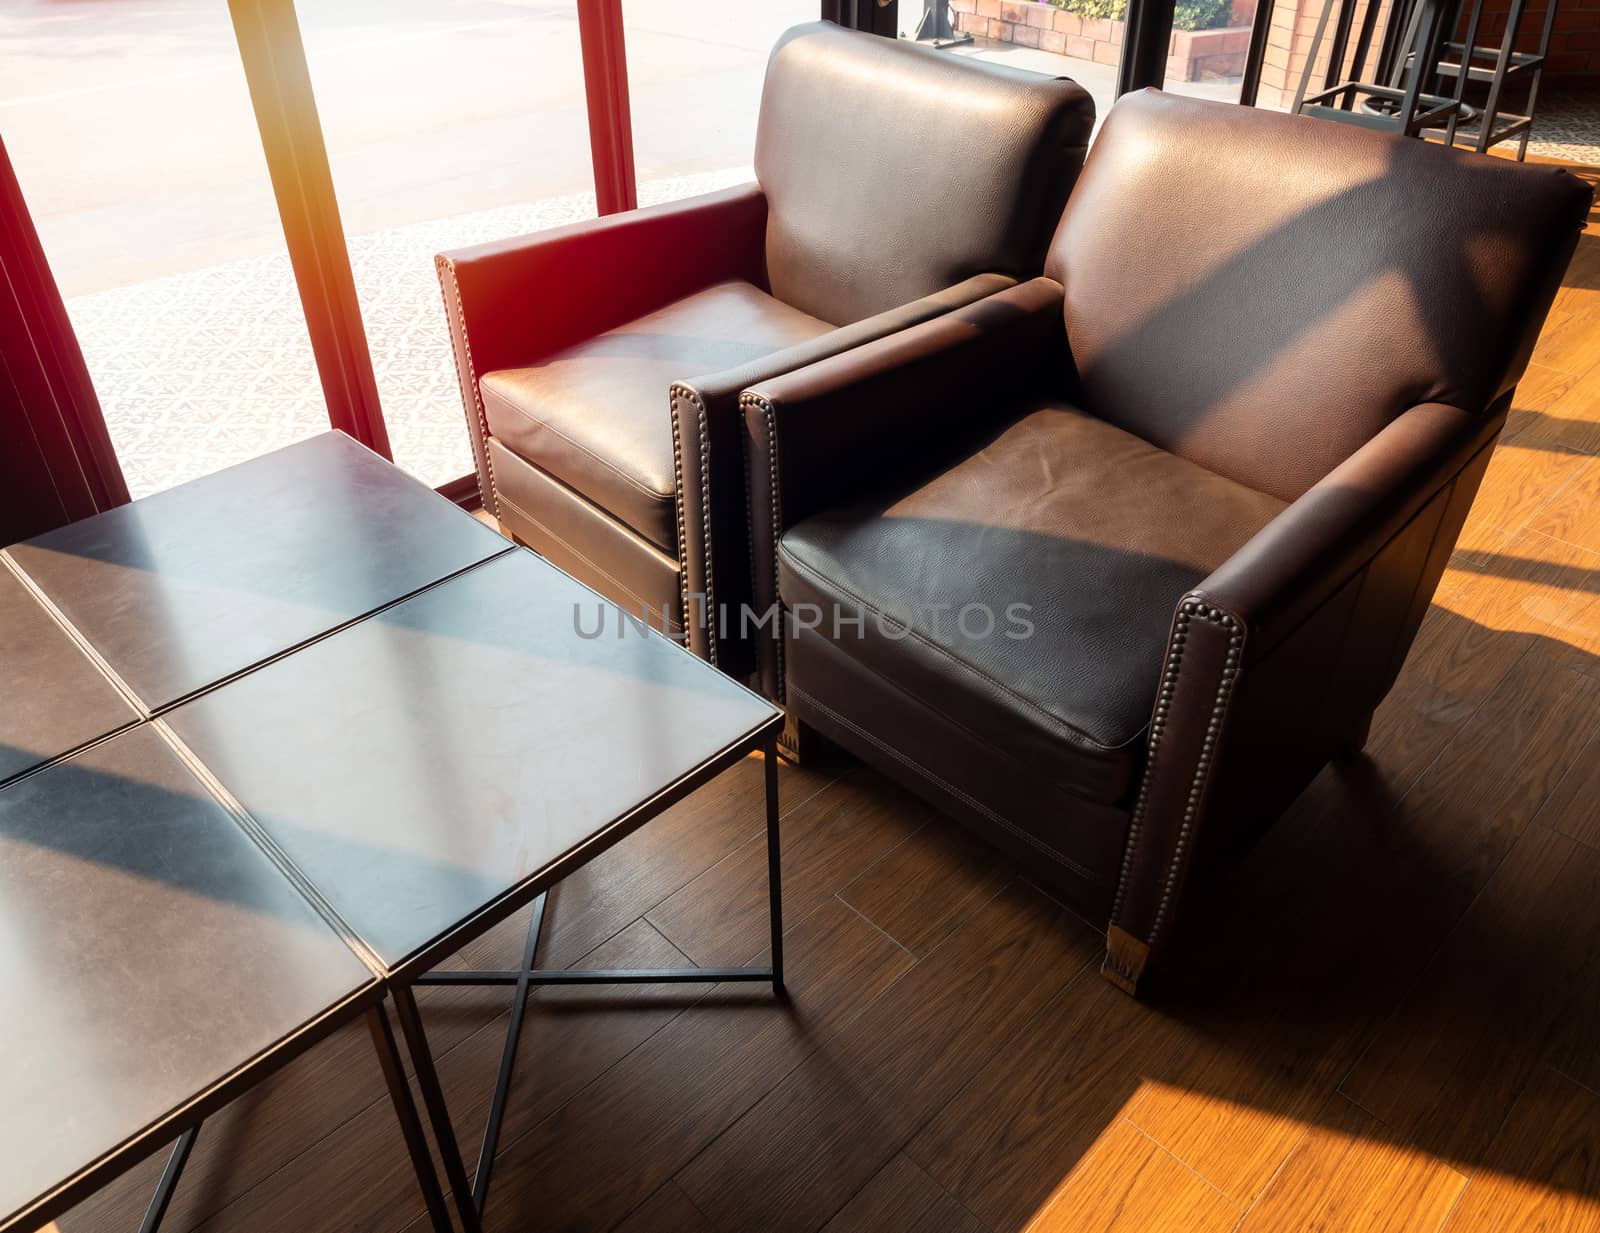 Brown leather sofa with wooden table on wooden floor near glass window in cafe on sunshine day.